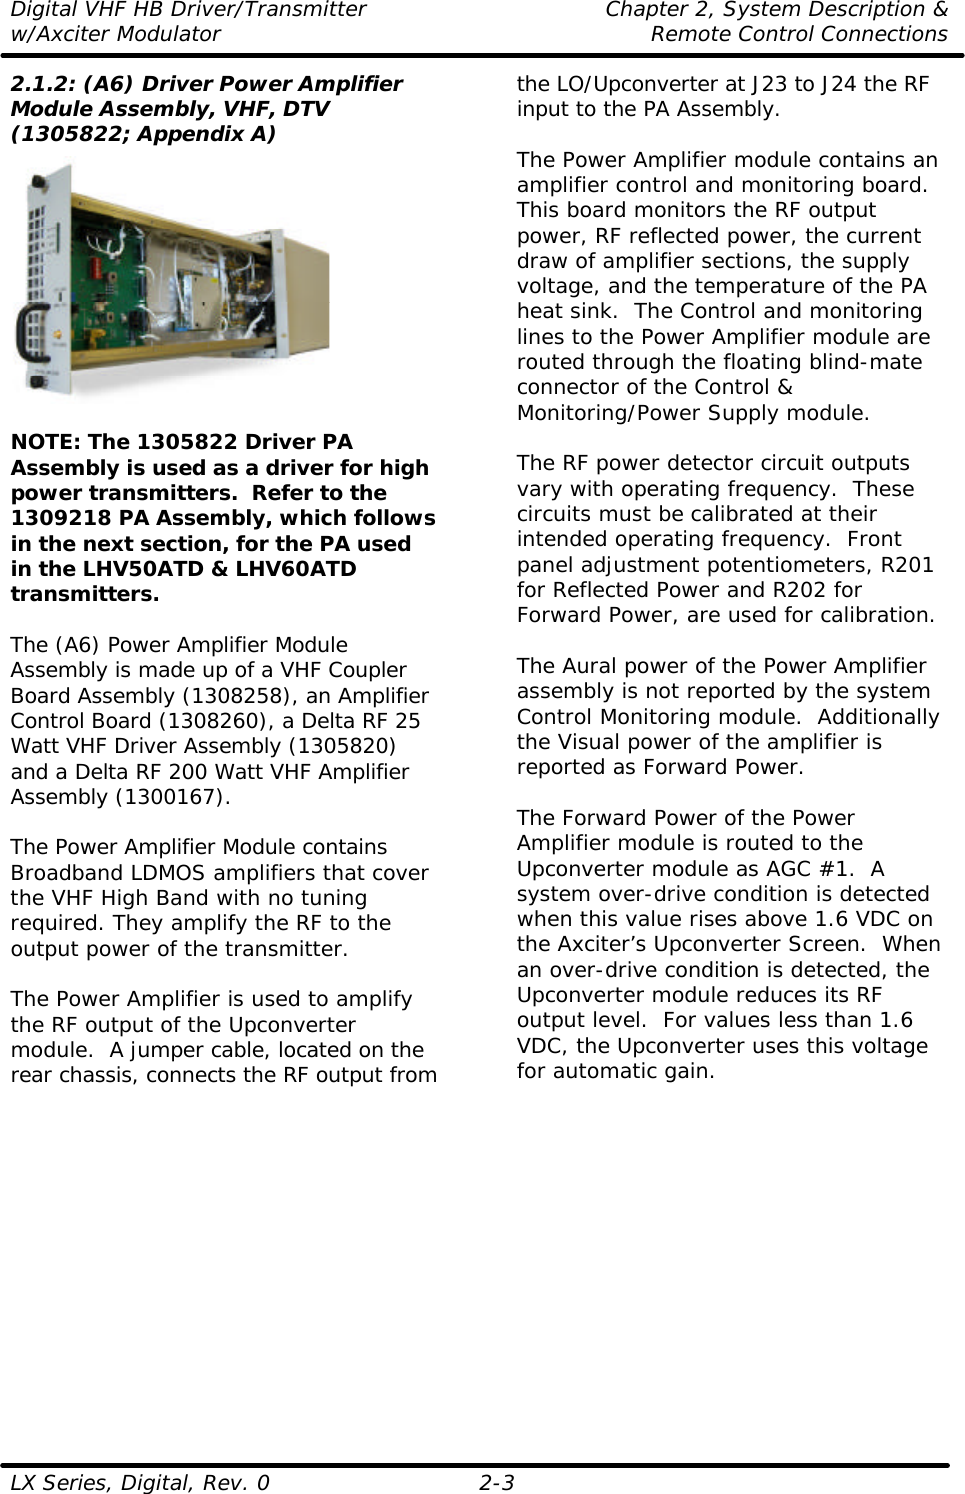 Digital VHF HB Driver/Transmitter Chapter 2, System Description &amp; w/Axciter Modulator Remote Control Connections LX Series, Digital, Rev. 0    2-3 2.1.2: (A6) Driver Power Amplifier Module Assembly, VHF, DTV (1305822; Appendix A)   NOTE: The 1305822 Driver PA Assembly is used as a driver for high power transmitters.  Refer to the 1309218 PA Assembly, which follows in the next section, for the PA used in the LHV50ATD &amp; LHV60ATD transmitters.  The (A6) Power Amplifier Module Assembly is made up of a VHF Coupler Board Assembly (1308258), an Amplifier Control Board (1308260), a Delta RF 25 Watt VHF Driver Assembly (1305820) and a Delta RF 200 Watt VHF Amplifier Assembly (1300167).  The Power Amplifier Module contains Broadband LDMOS amplifiers that cover the VHF High Band with no tuning required. They amplify the RF to the output power of the transmitter.  The Power Amplifier is used to amplify the RF output of the Upconverter module.  A jumper cable, located on the rear chassis, connects the RF output from the LO/Upconverter at J23 to J24 the RF input to the PA Assembly.  The Power Amplifier module contains an amplifier control and monitoring board.  This board monitors the RF output power, RF reflected power, the current draw of amplifier sections, the supply voltage, and the temperature of the PA heat sink.  The Control and monitoring lines to the Power Amplifier module are routed through the floating blind-mate connector of the Control &amp; Monitoring/Power Supply module.  The RF power detector circuit outputs vary with operating frequency.  These circuits must be calibrated at their intended operating frequency.  Front panel adjustment potentiometers, R201 for Reflected Power and R202 for Forward Power, are used for calibration.  The Aural power of the Power Amplifier assembly is not reported by the system Control Monitoring module.  Additionally the Visual power of the amplifier is reported as Forward Power.  The Forward Power of the Power Amplifier module is routed to the Upconverter module as AGC #1.  A system over-drive condition is detected when this value rises above 1.6 VDC on the Axciter’s Upconverter Screen.  When an over-drive condition is detected, the Upconverter module reduces its RF output level.  For values less than 1.6 VDC, the Upconverter uses this voltage for automatic gain.  